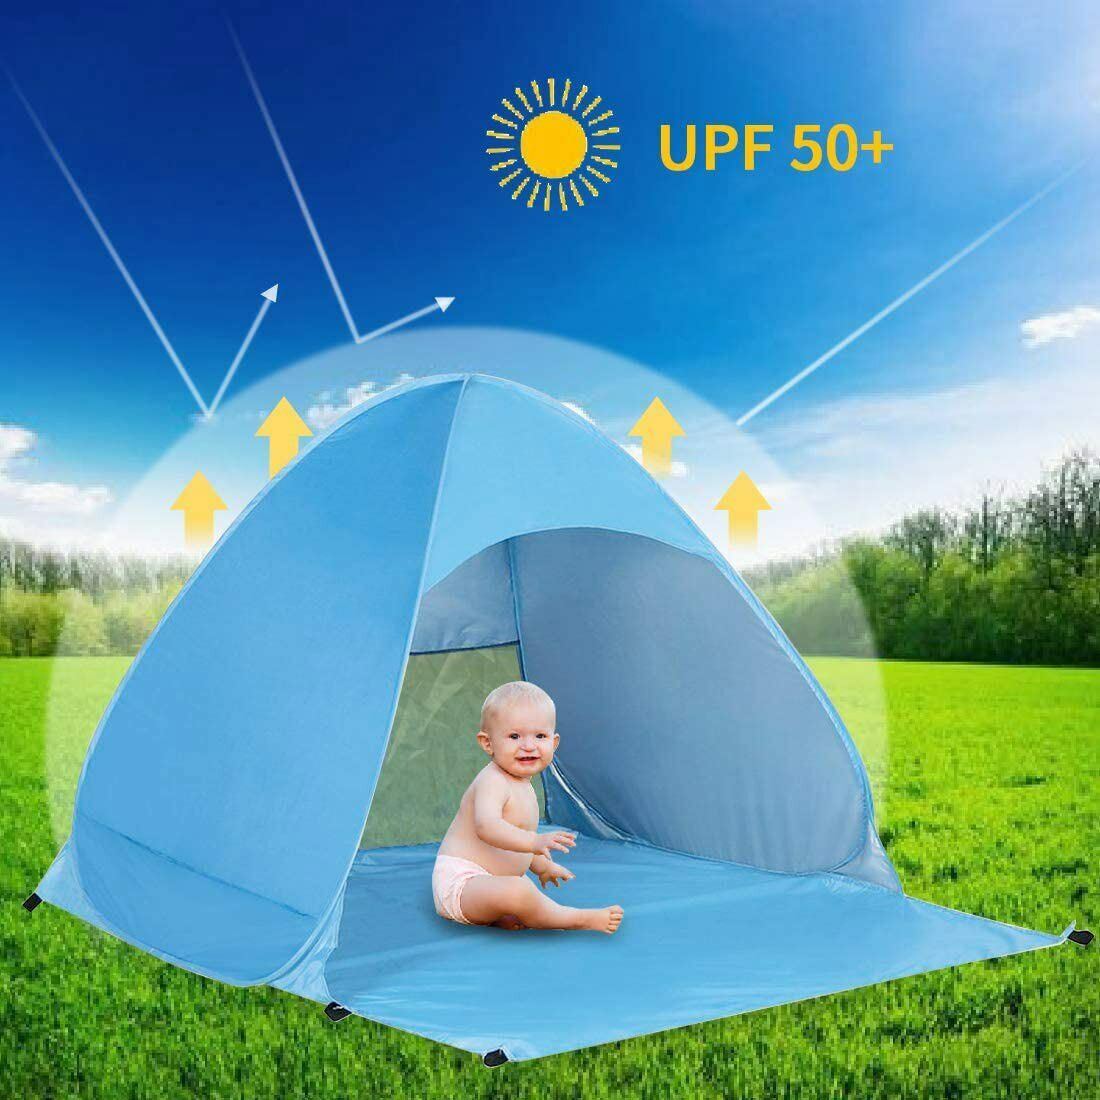 Pop Up Beach Tent for 1-3 Person Rated UPF 50+ for UV Sun Protection Waterproof